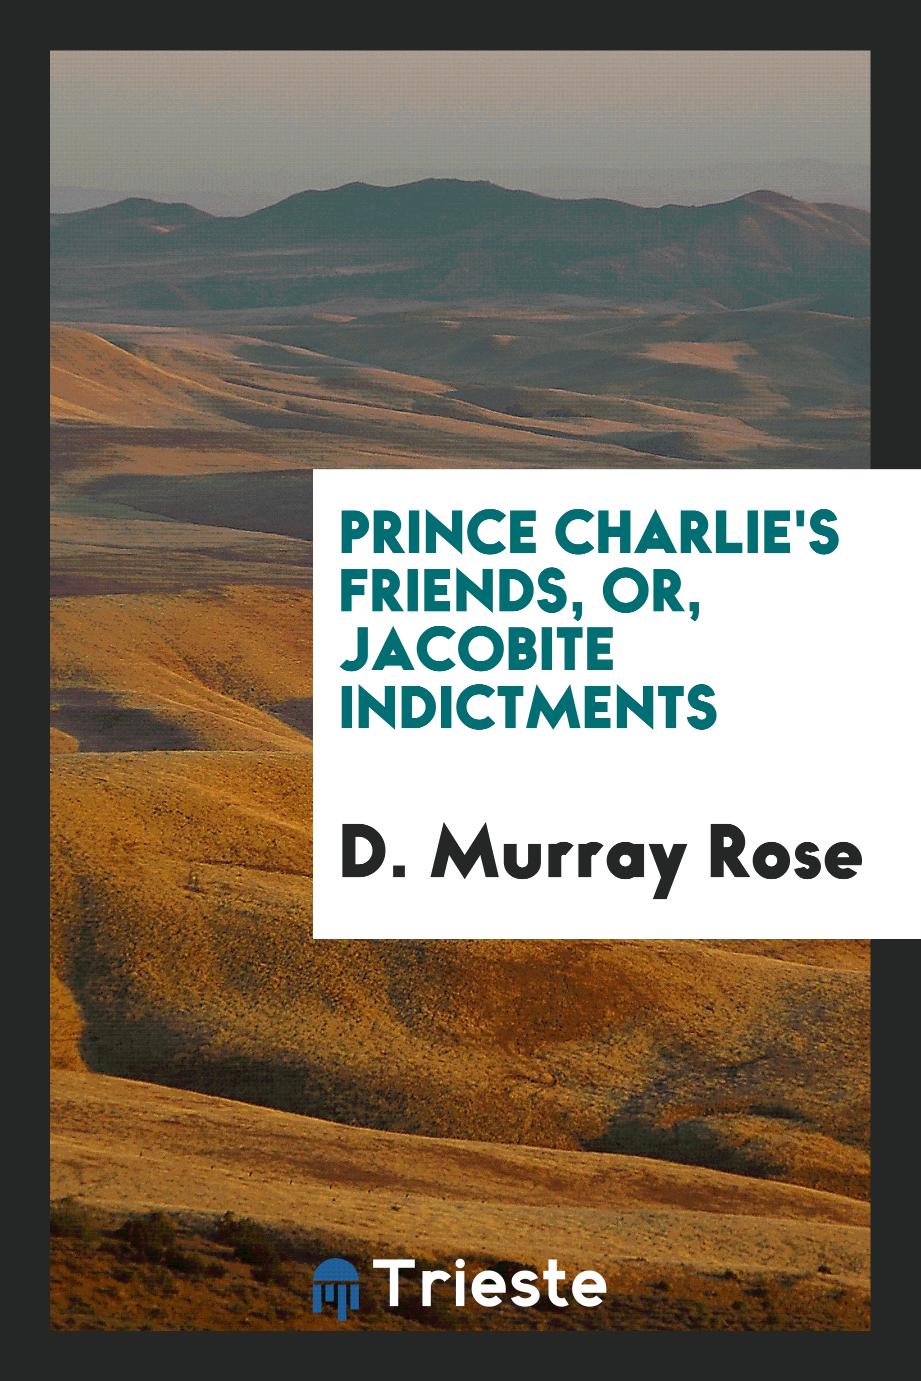 Prince Charlie's Friends, Or, Jacobite Indictments